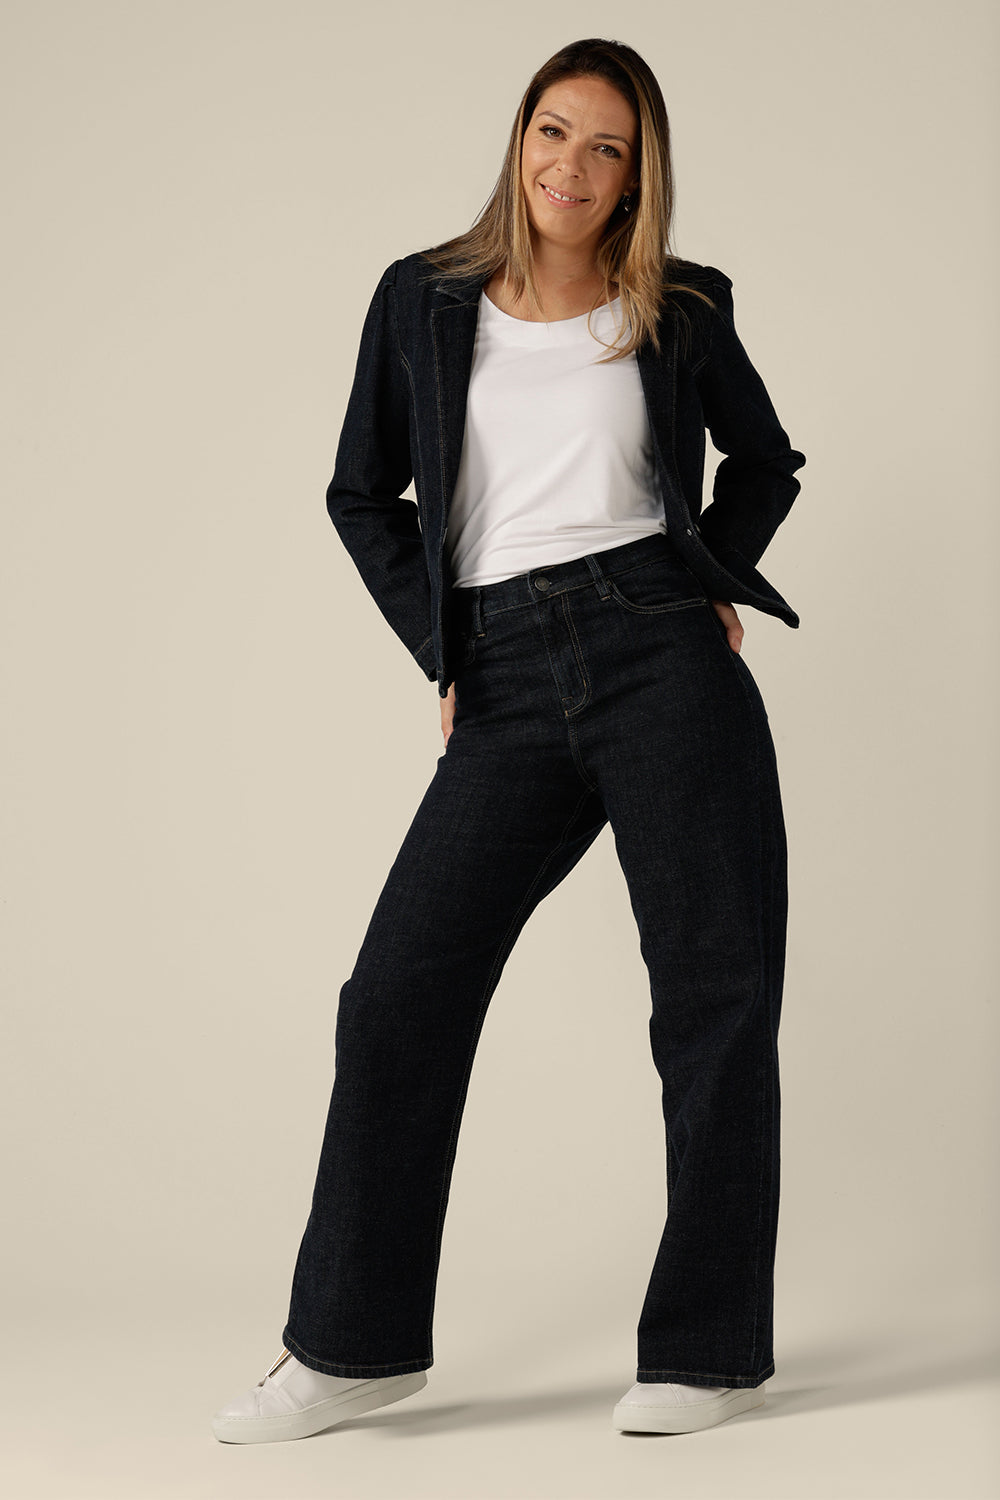 High-waisted, flared leg jeans in midnight denim, size 8 worn with a white bamboo jersey top and denim jacket. Ethically and sustainably made by Australian and New Zealand women's clothing brand, L&F, and available to shop in an inclusive size range of 8 to 24.